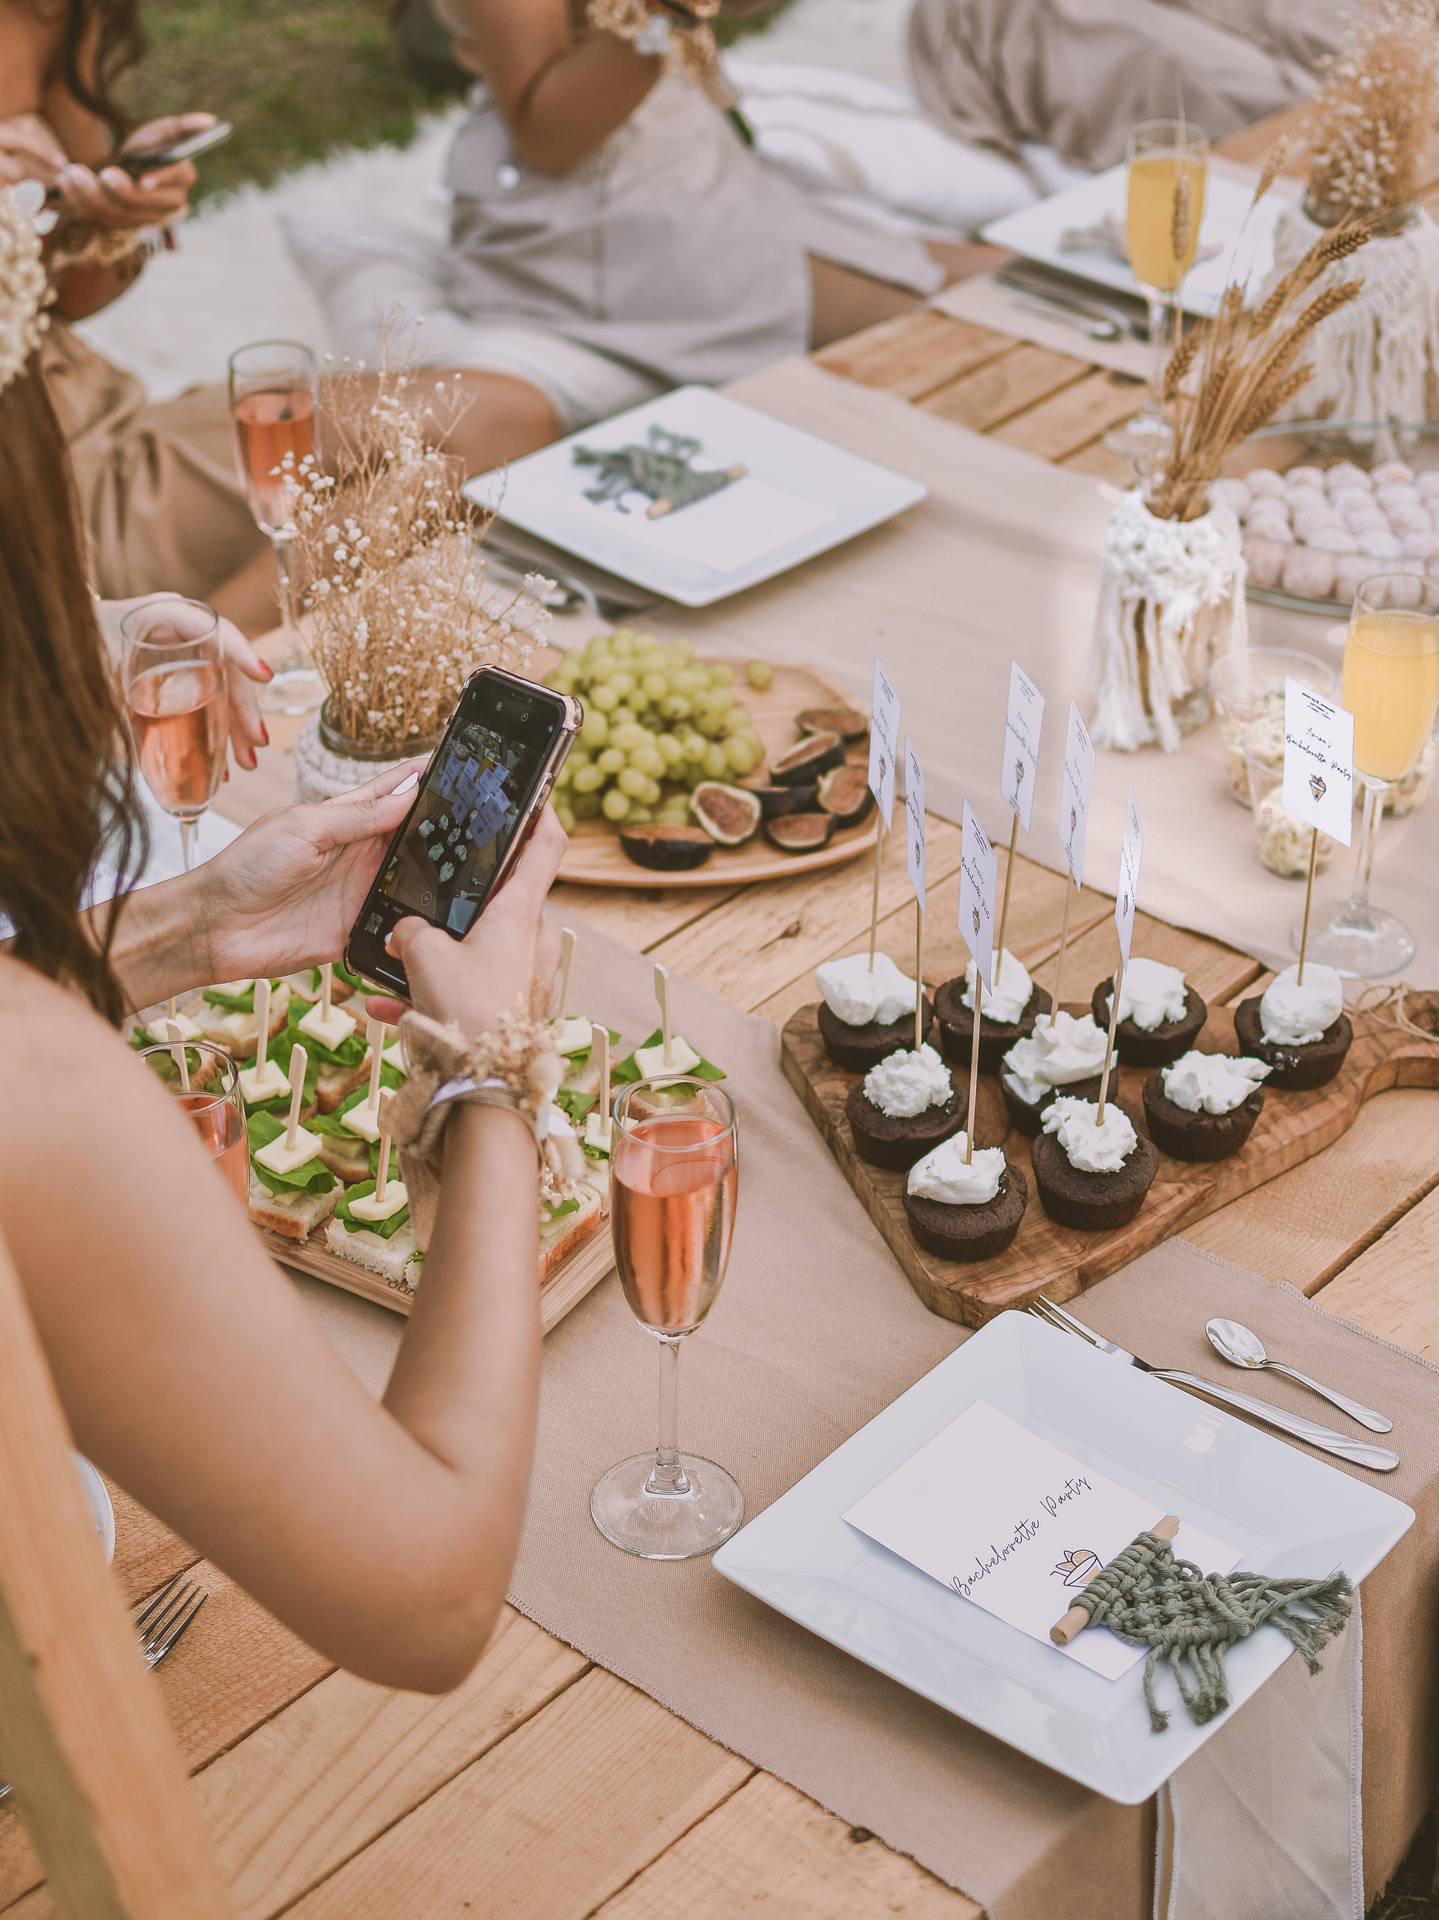 Woman Taking Photo Of Bachelorette Party Food